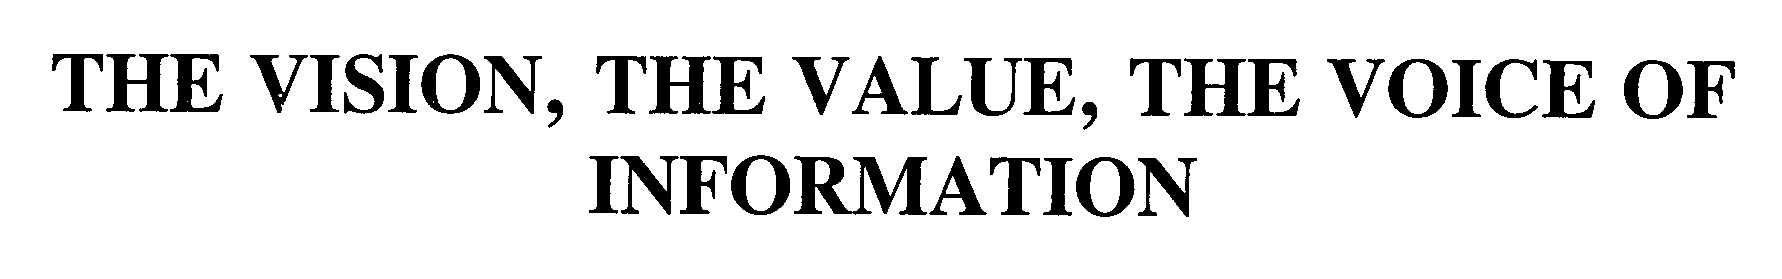  THE VISION, THE VALUE, THE VOICE OF INFORMATION